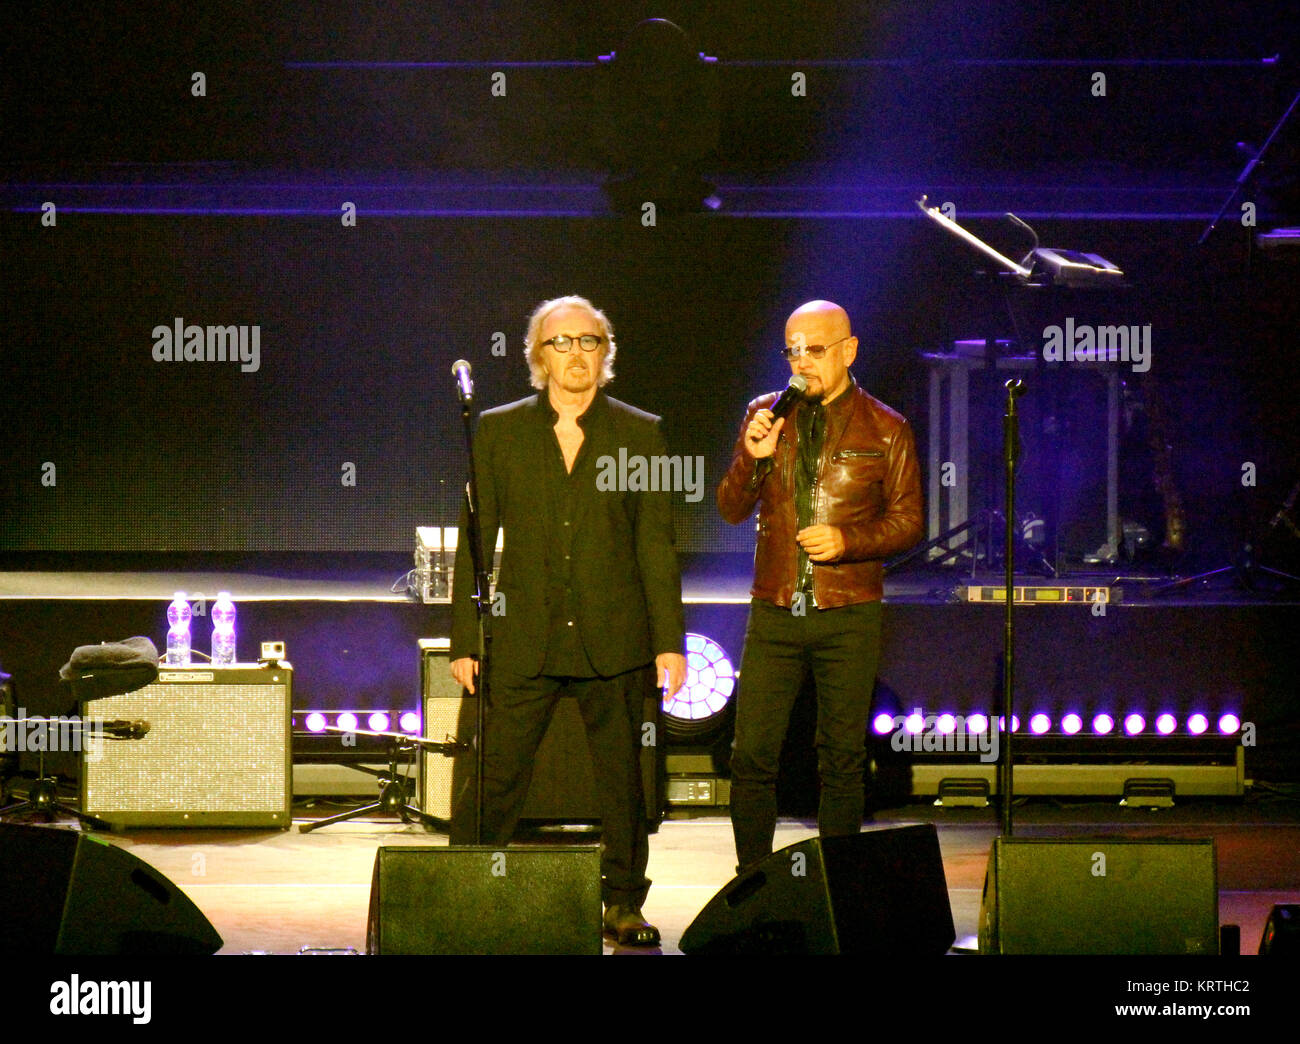 Verona, Italy - October 14, 2017: Live Concert of Umberto Tozzi an Italian pop singer with his friends Enrico Ruggeri on stage during the tour called  Stock Photo